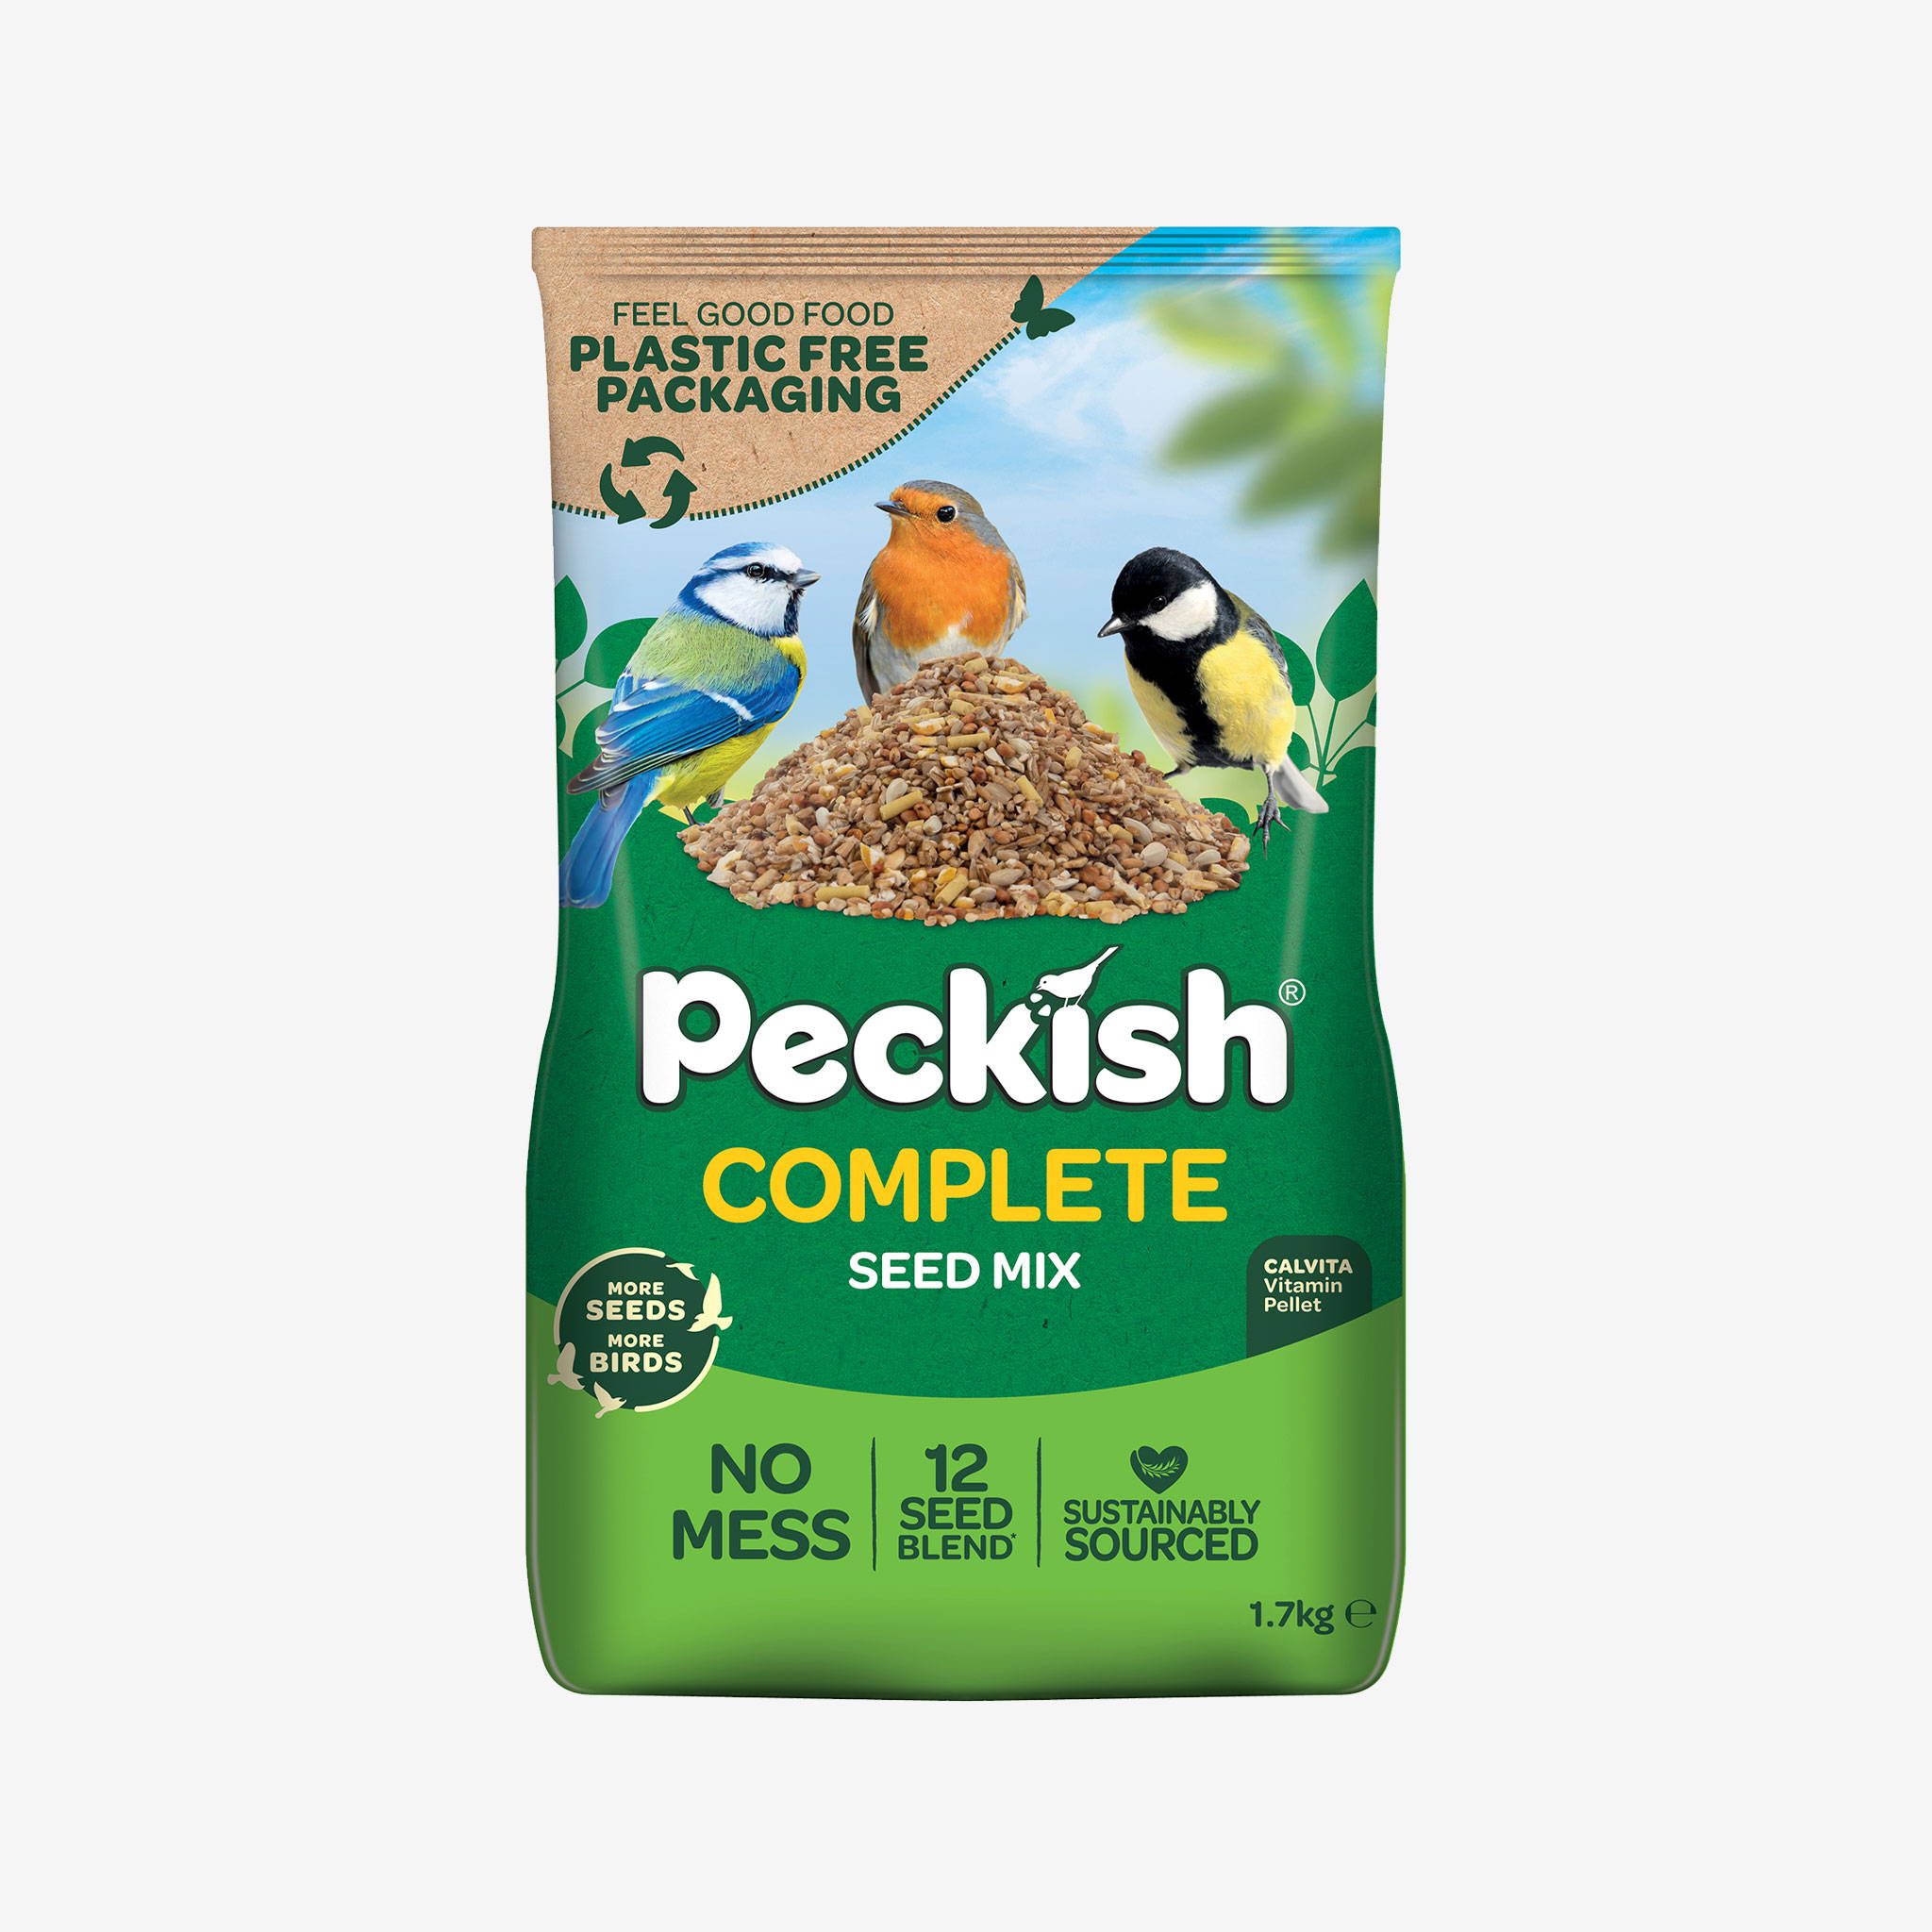 Peckish Complete Seed Mix in packaging